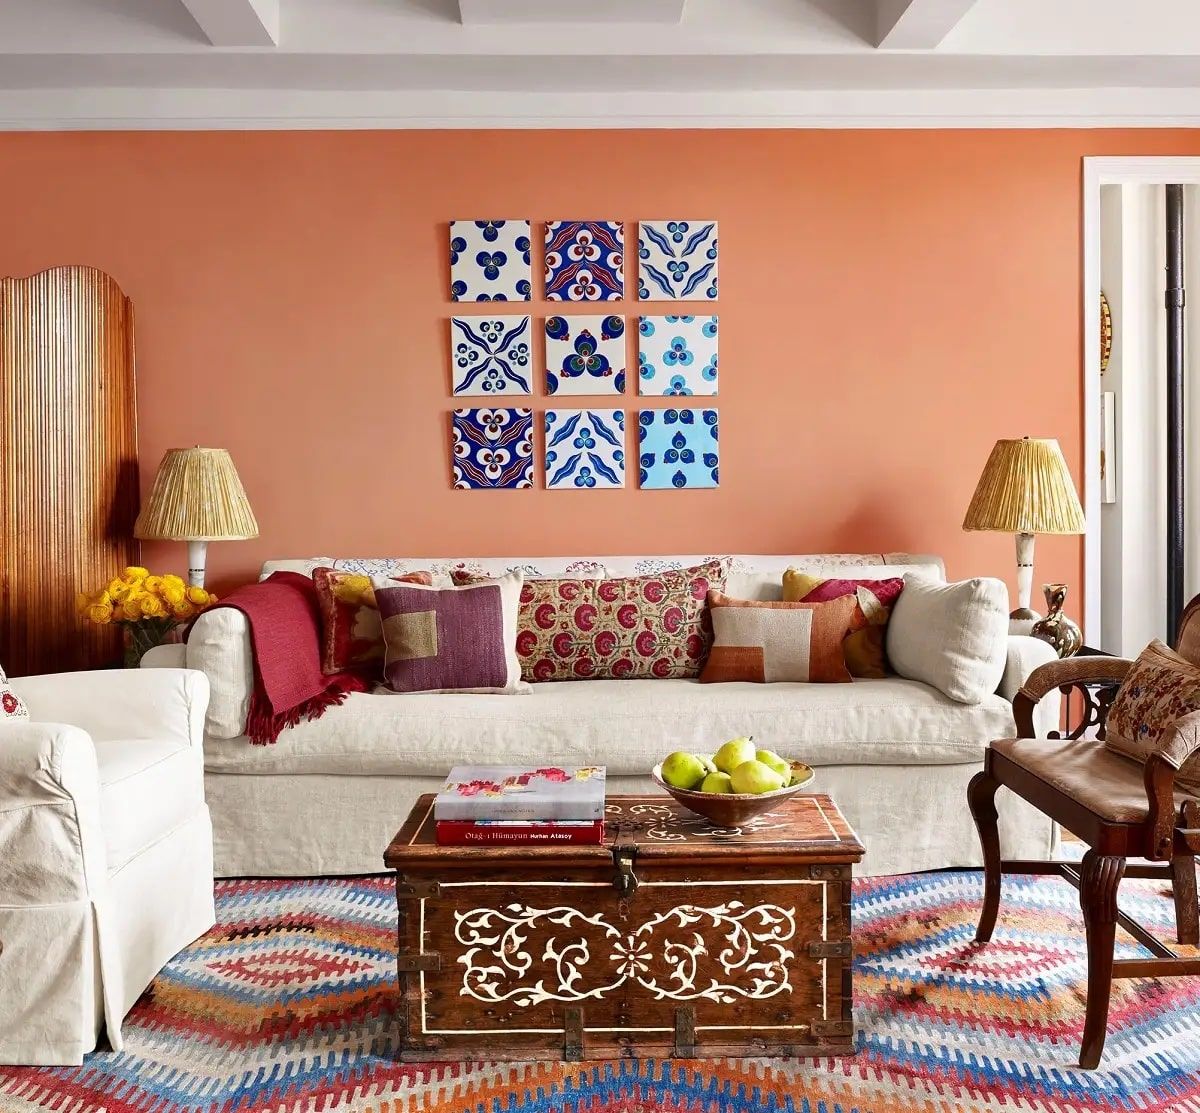 Living room designed by Sara Bengur featuring a colorful Turkish kilim rug